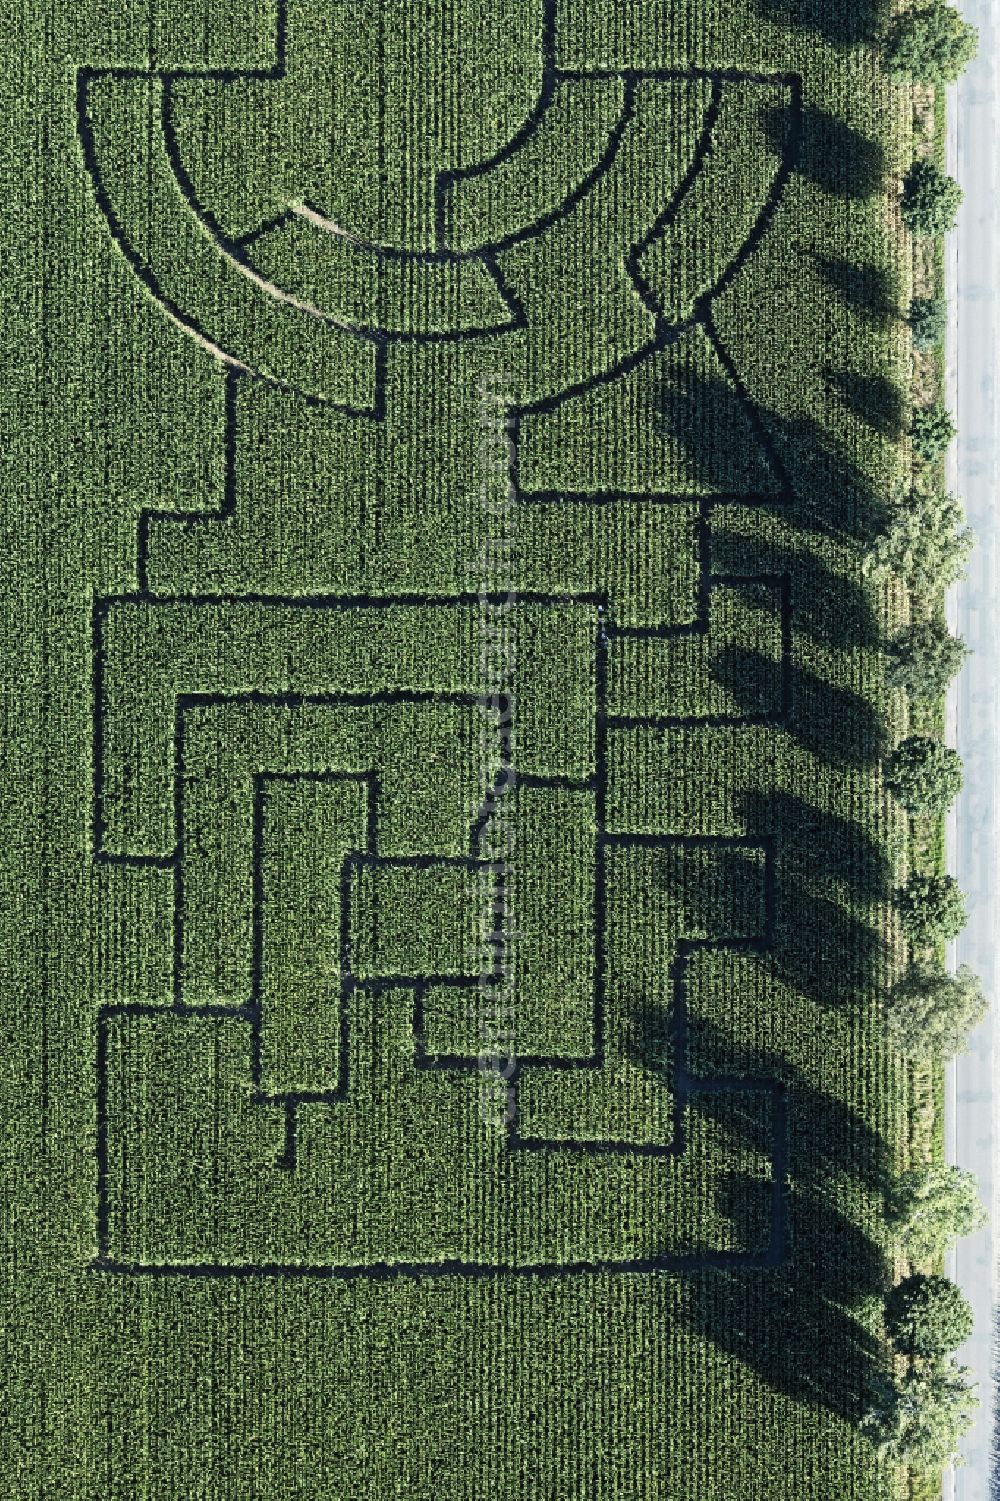 Uchte from the bird's eye view: Maze - Labyrinth with the outline of in a field in Uchte in the state Lower Saxony, Germany